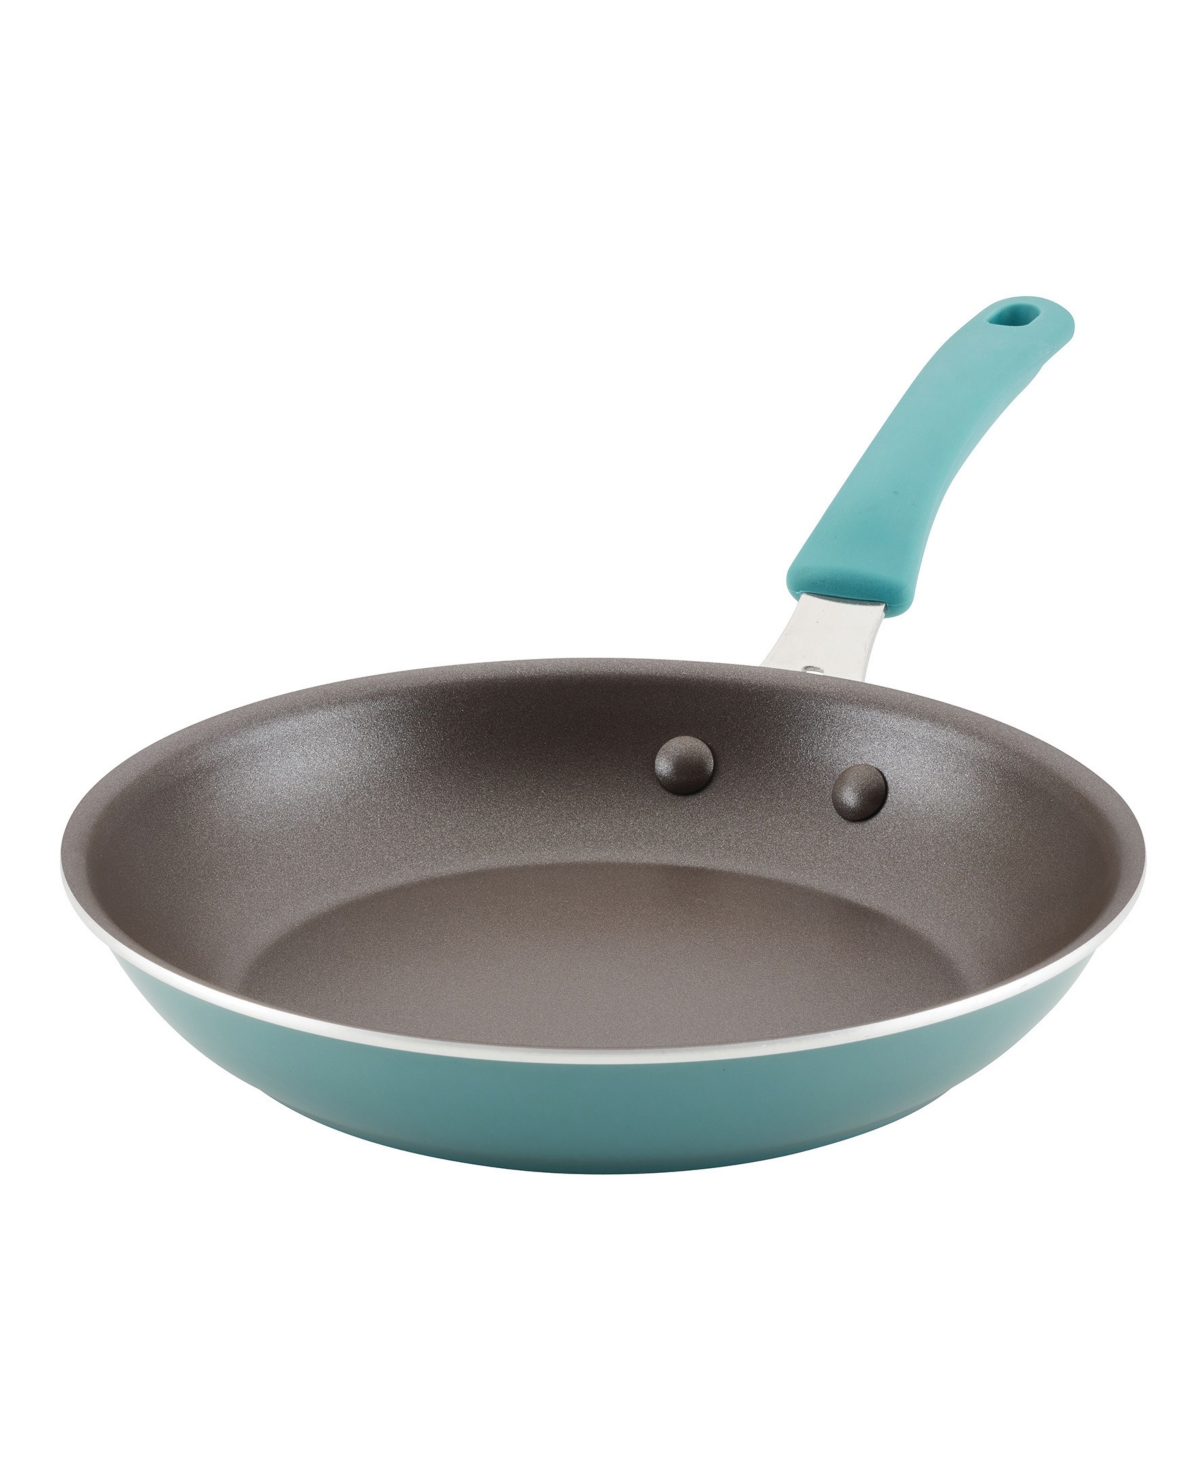 Rachael Ray Cook + Create Aluminum Nonstick Frying Pan, 10" In Agave Blue